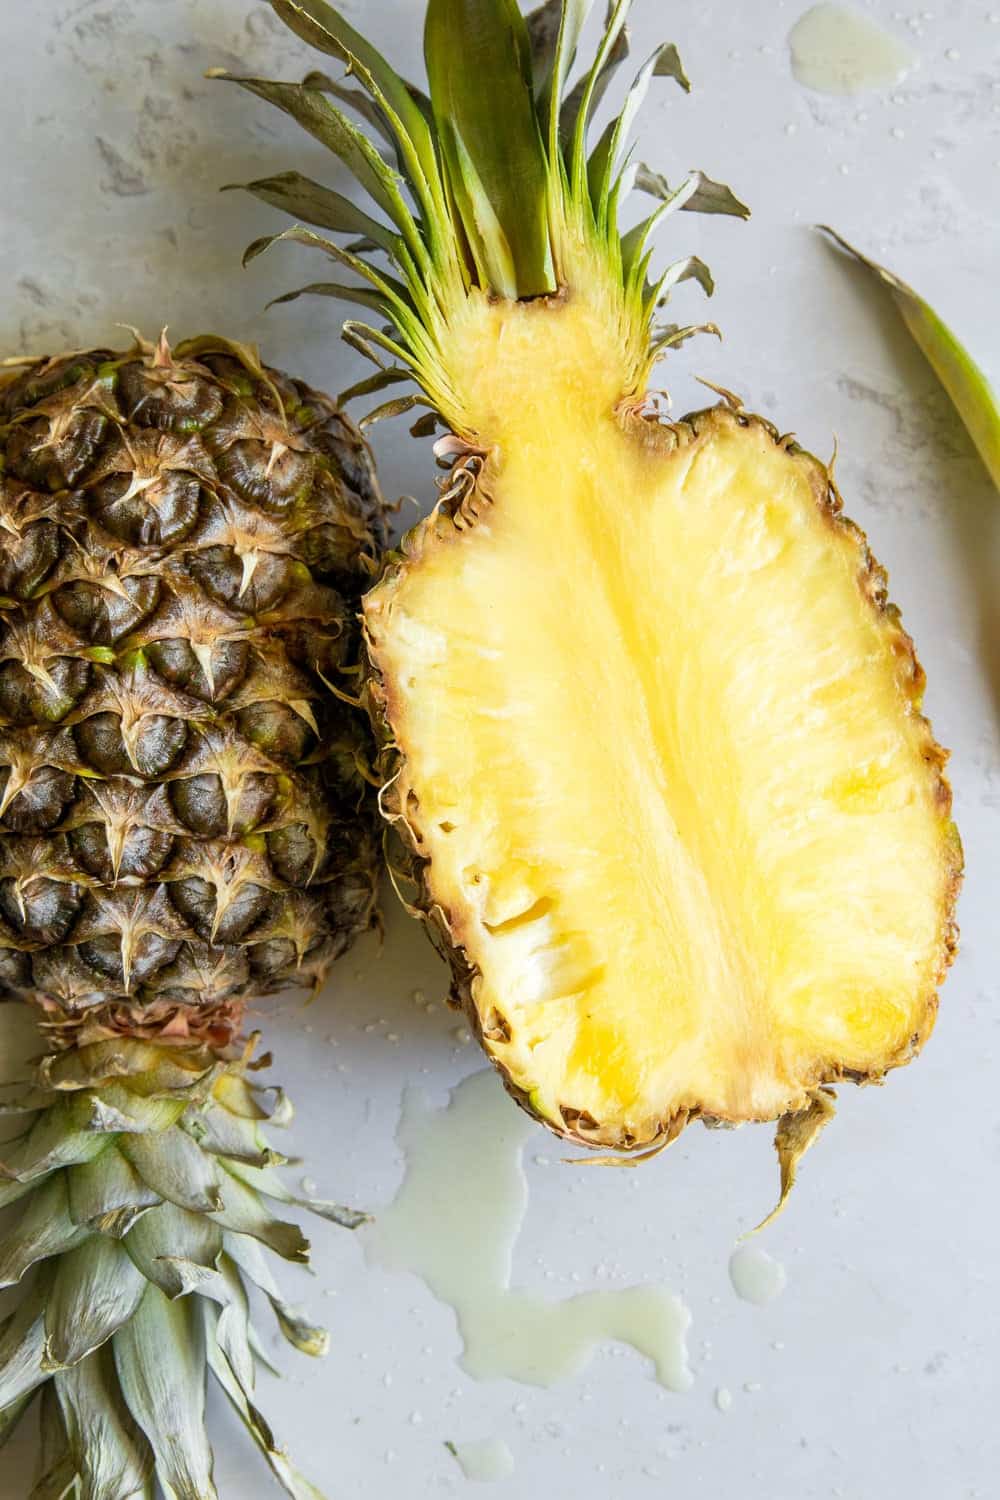 Benefits of pineapple for skin